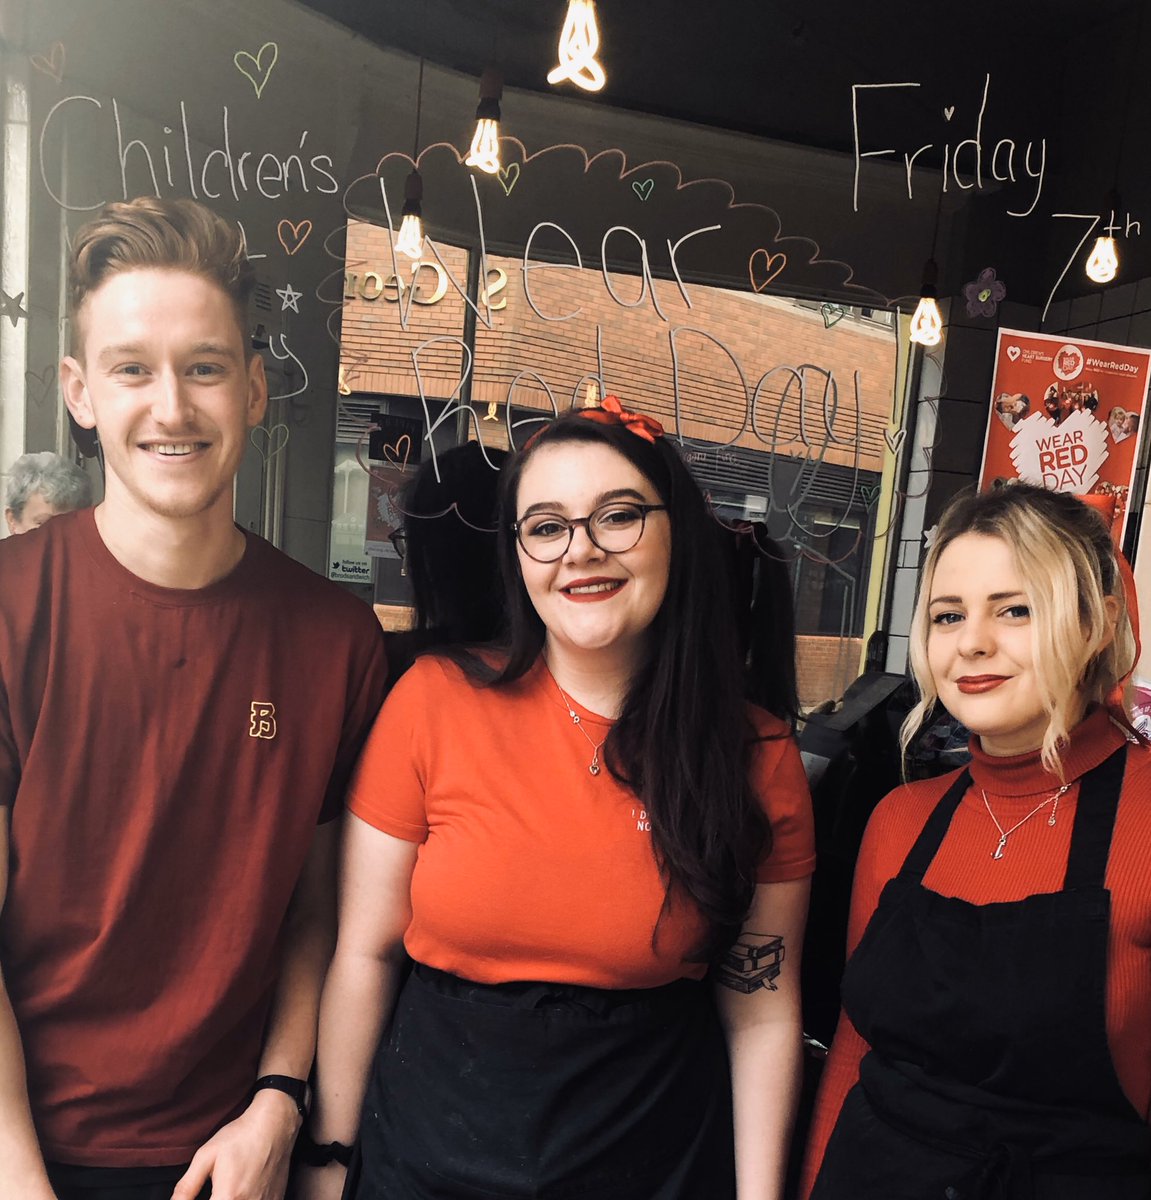 We’re supporting #wearredday ! All day we’ll be raising money for @CHSurgeryFund so please call in
#leeds #charity #brodsandwichbar #childrensheartsurgeryfund #leedscharity #fundraiser #fundraising #leedscentre